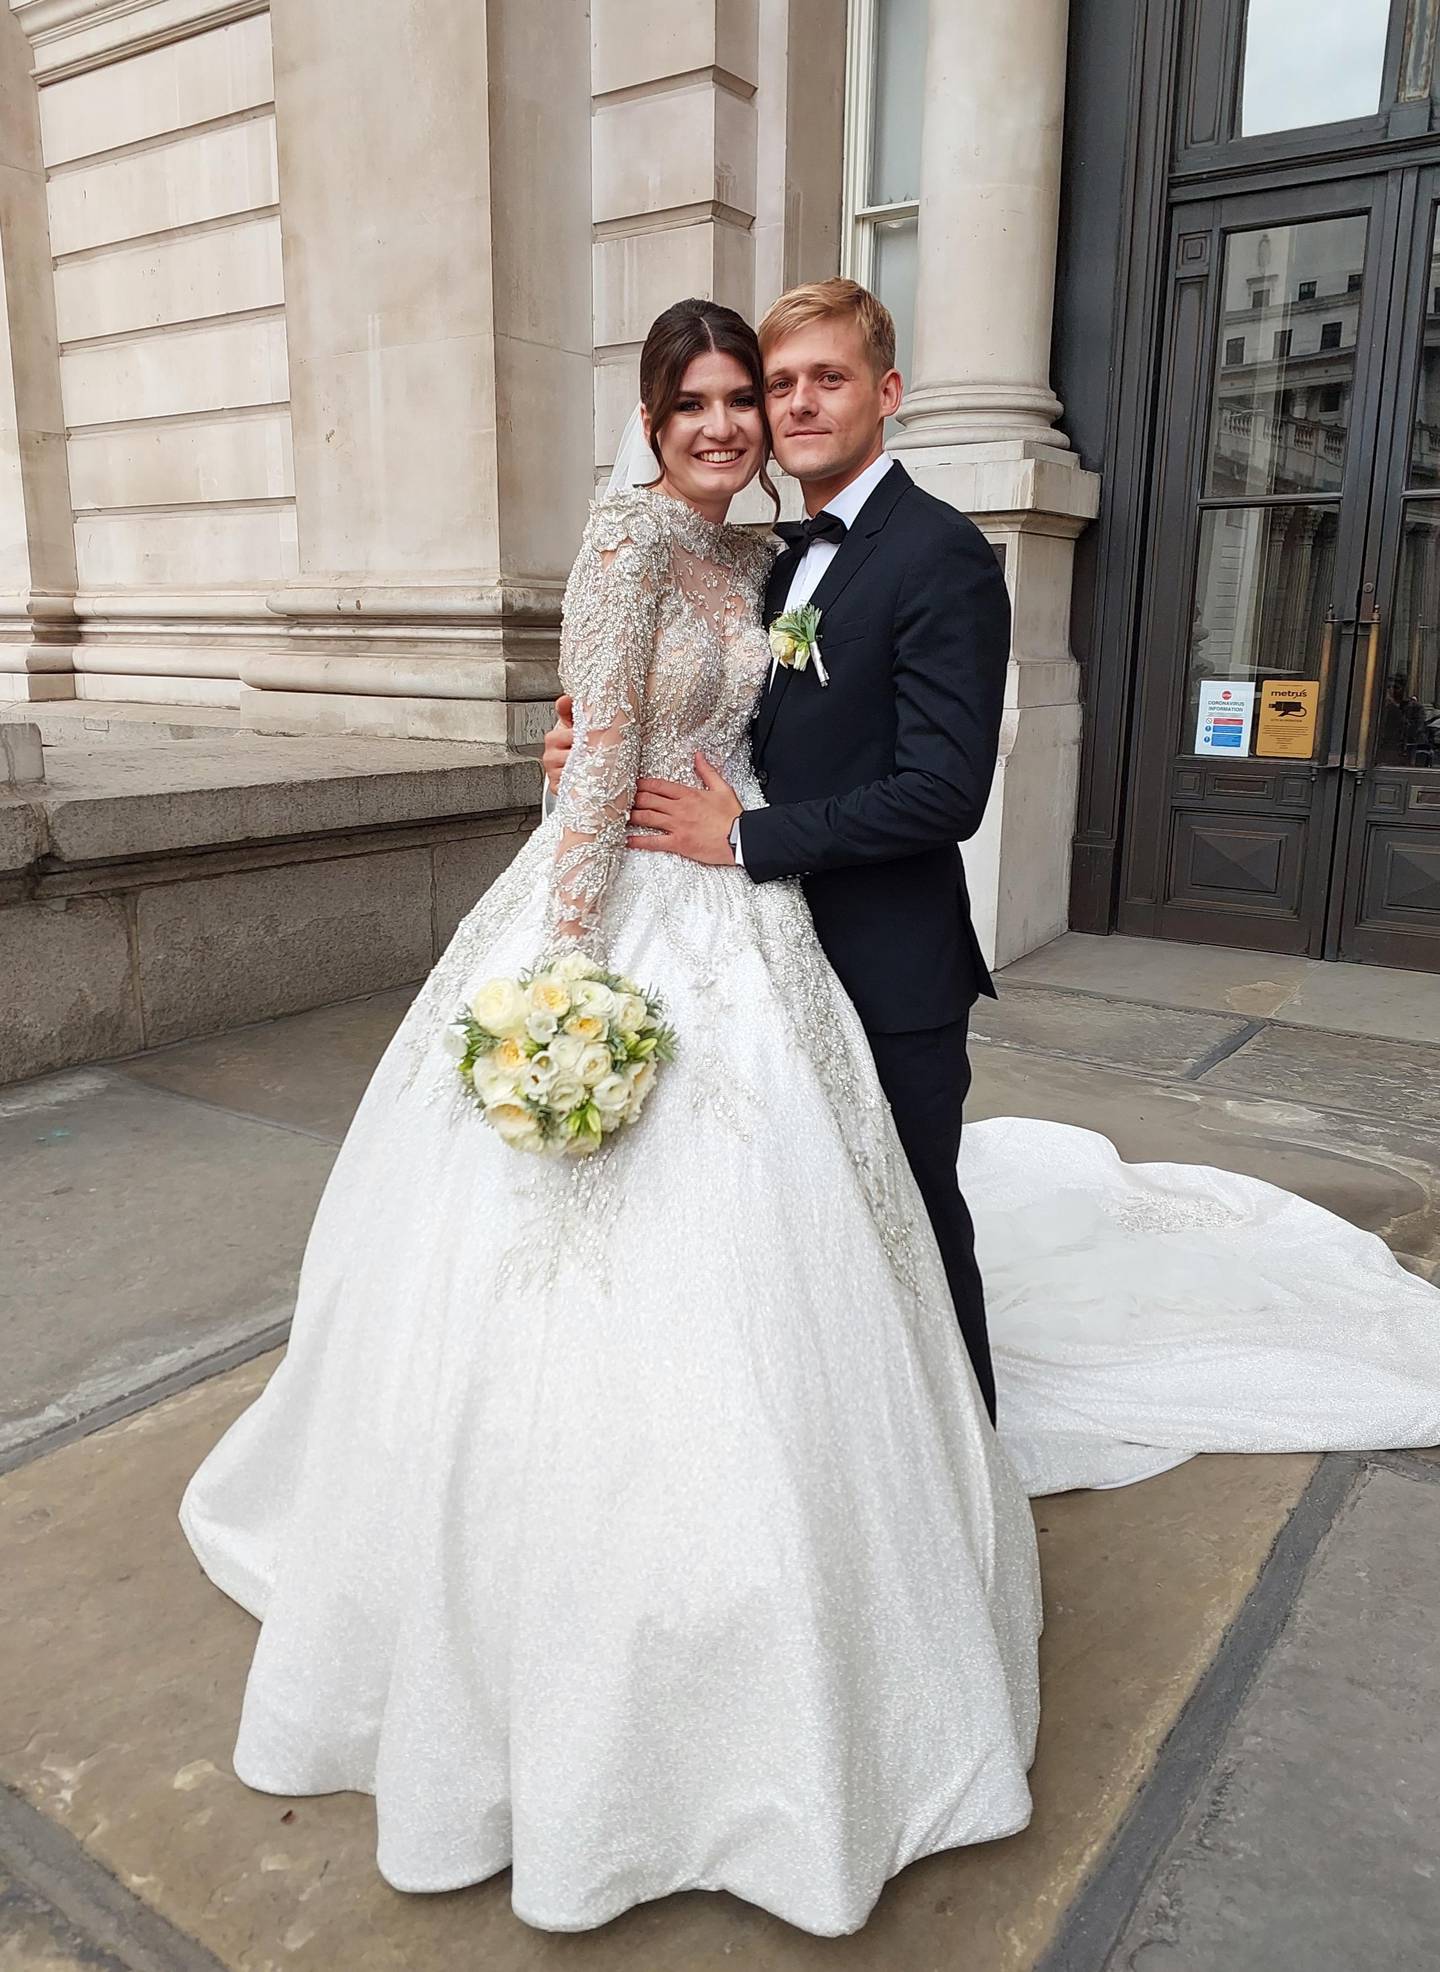 A real-life bride and groom outside the Halpern show in London. Sarah Maisey / The National 